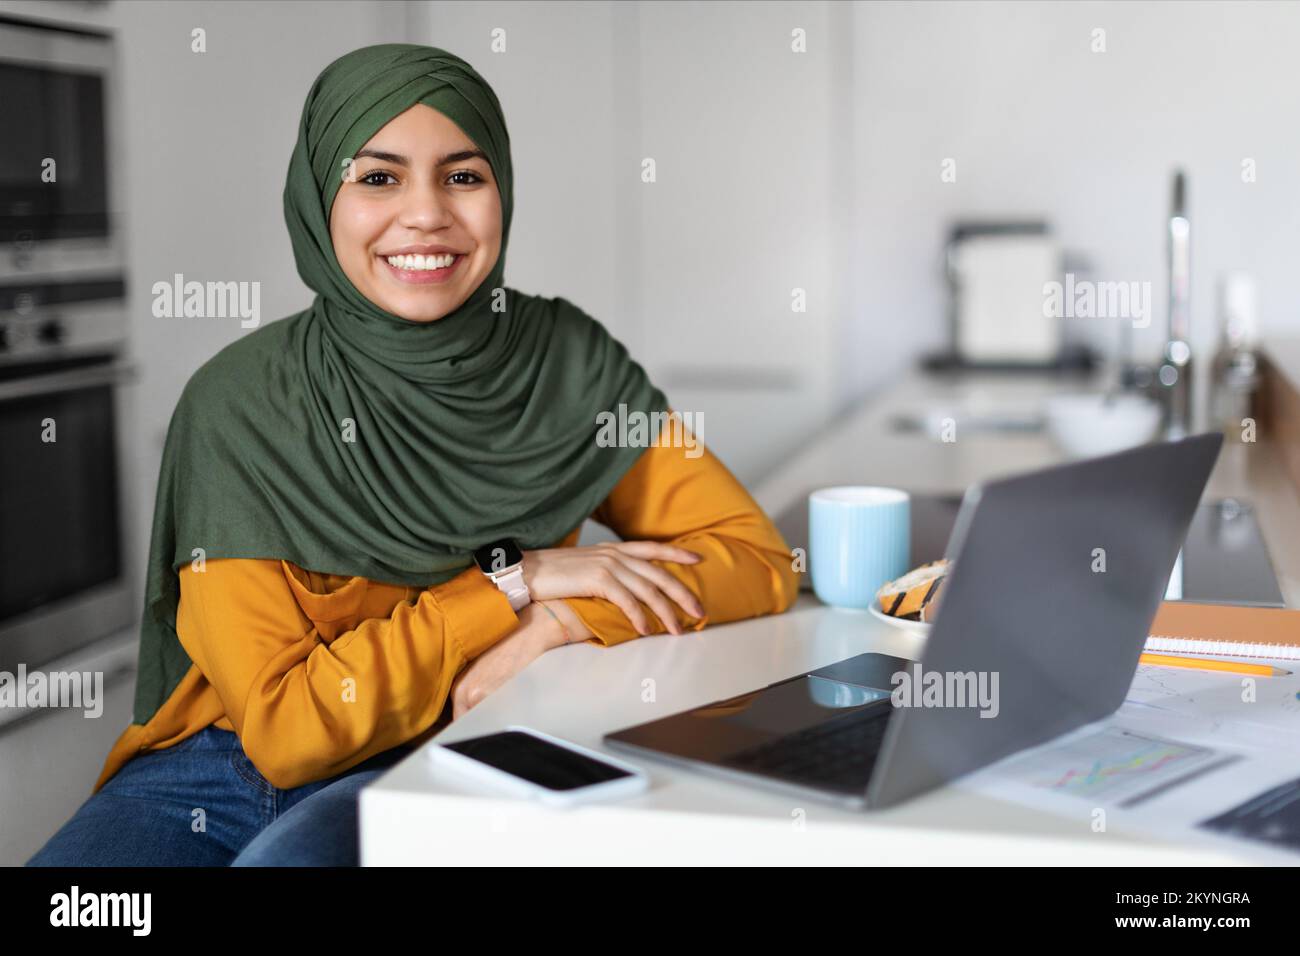 Freelance. Middle Eastern Woman In Hijab Sitting At Desk With With Laptop Stock Photo